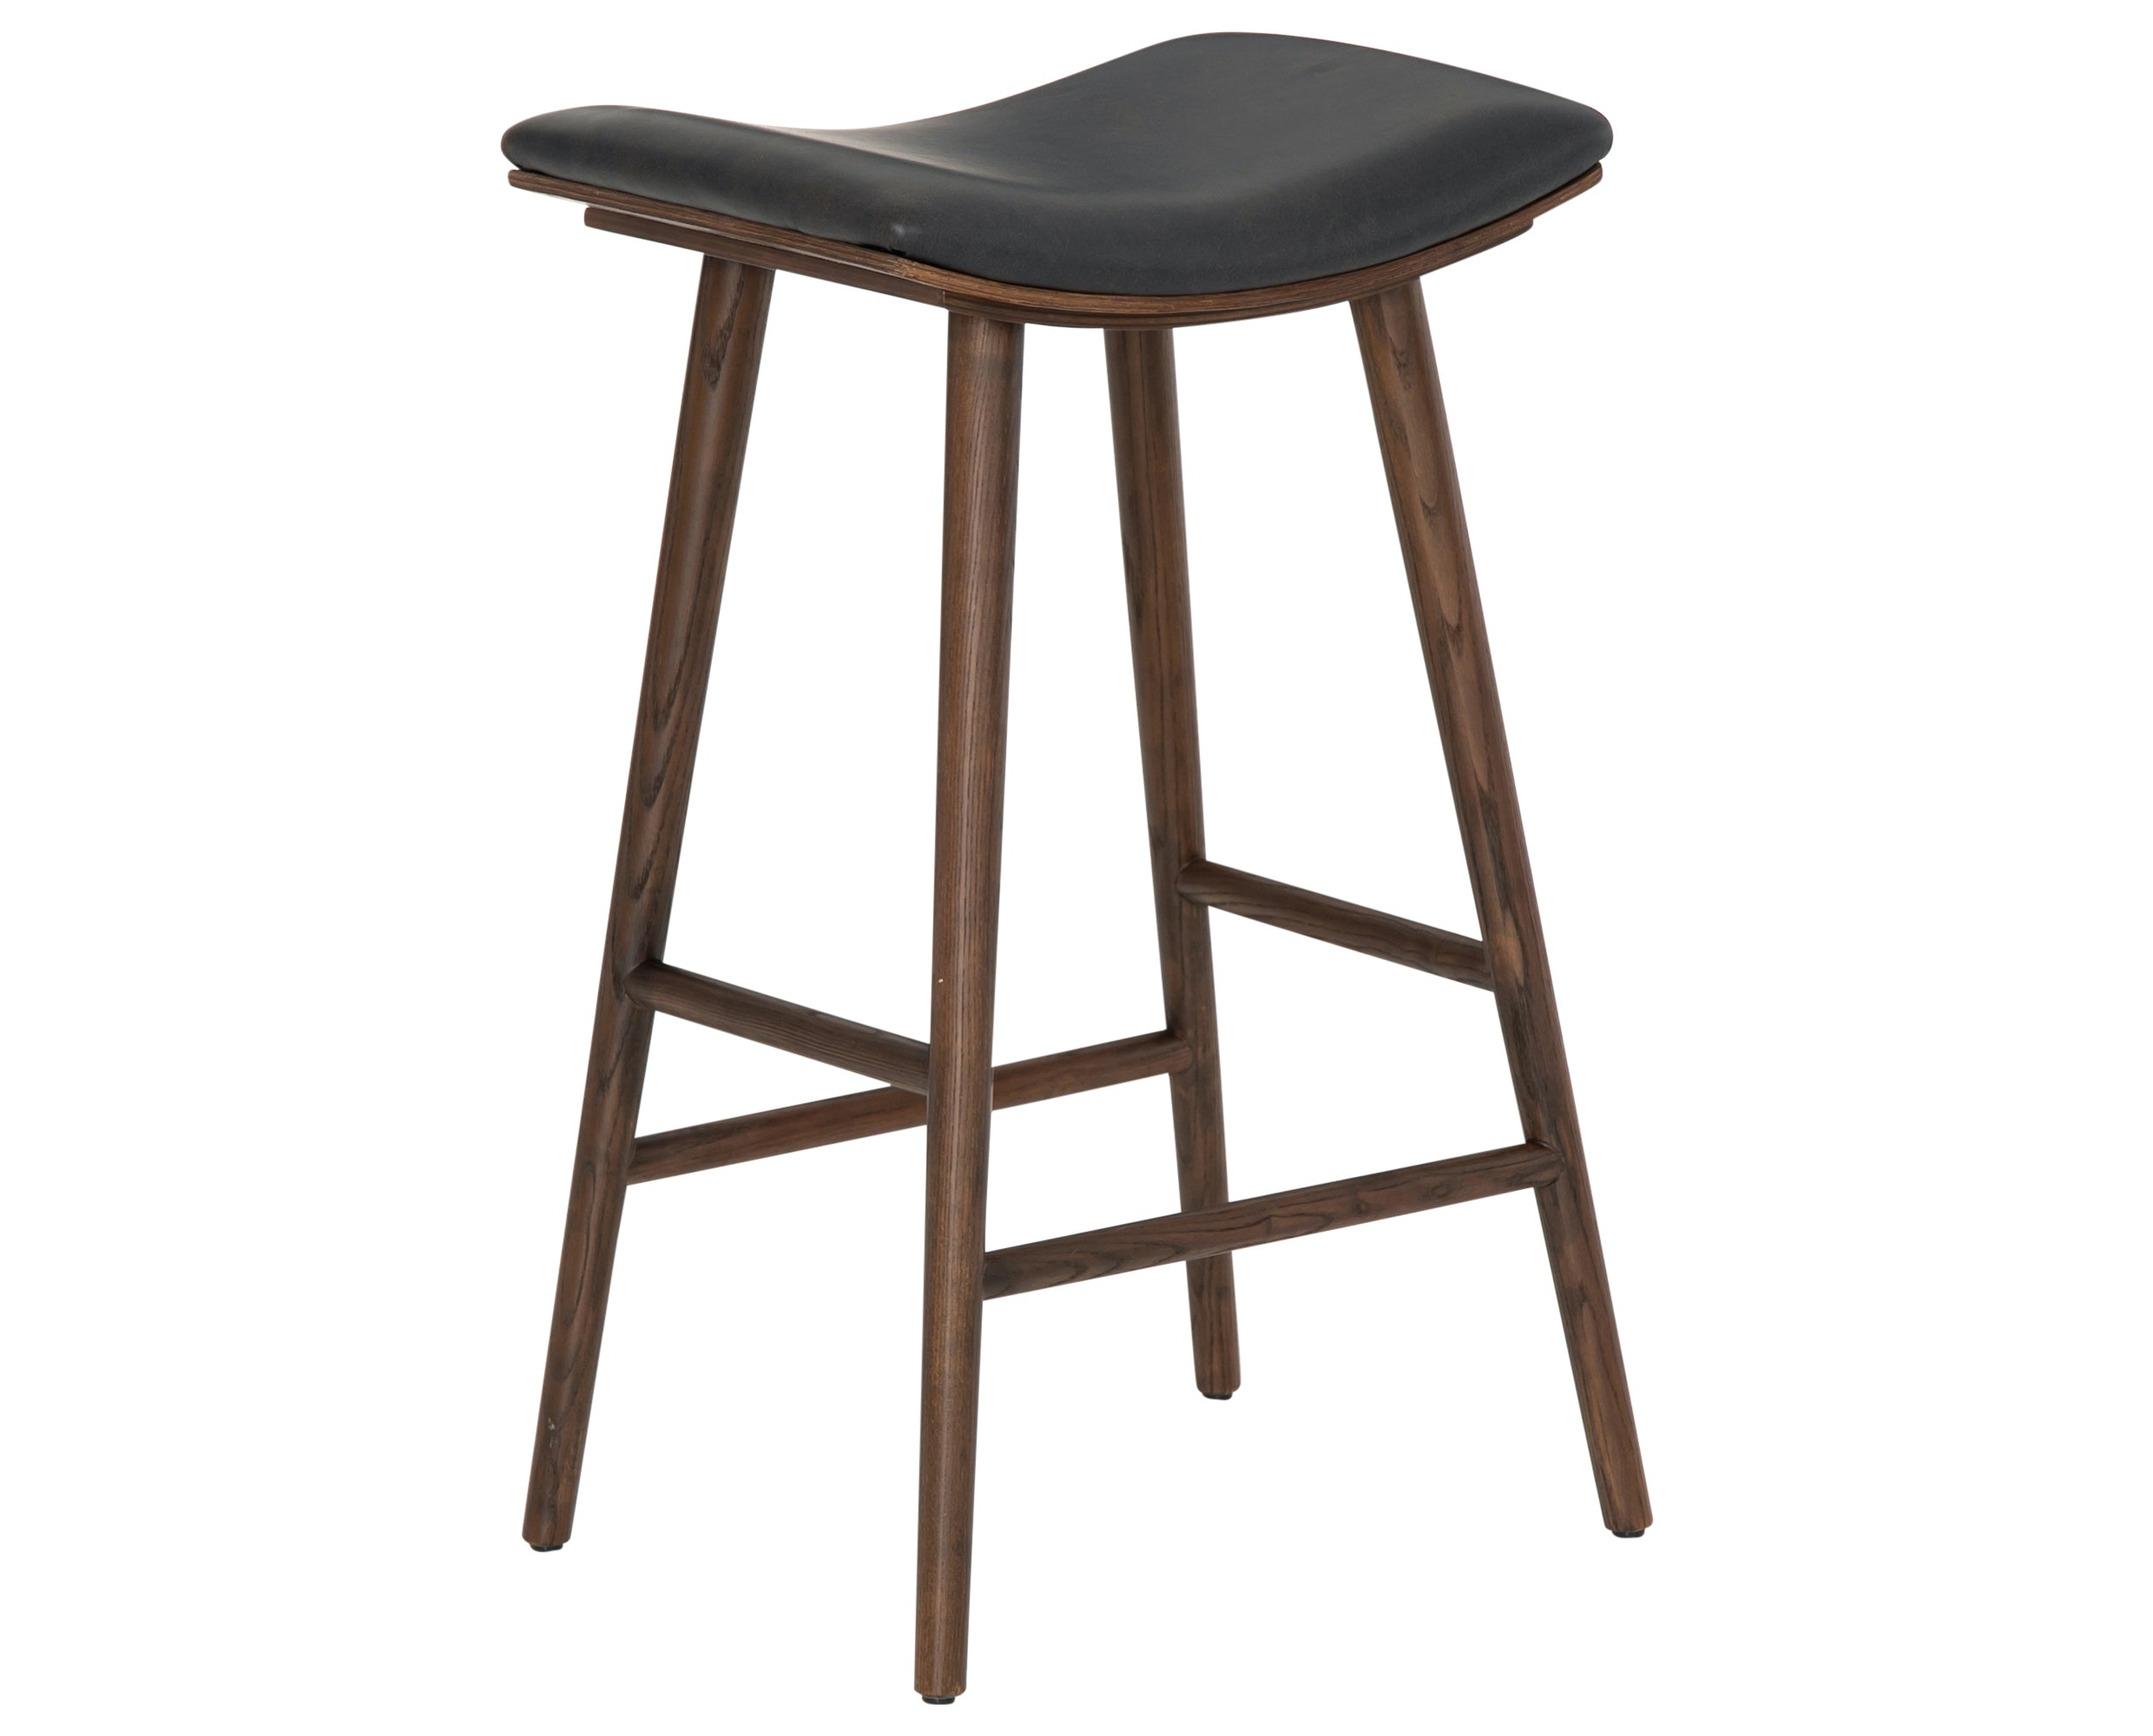 Distressed Black Faux Leather with Warm Parawood (Bar Height) | Union Bar/Counter Stool | Valley Ridge Furniture